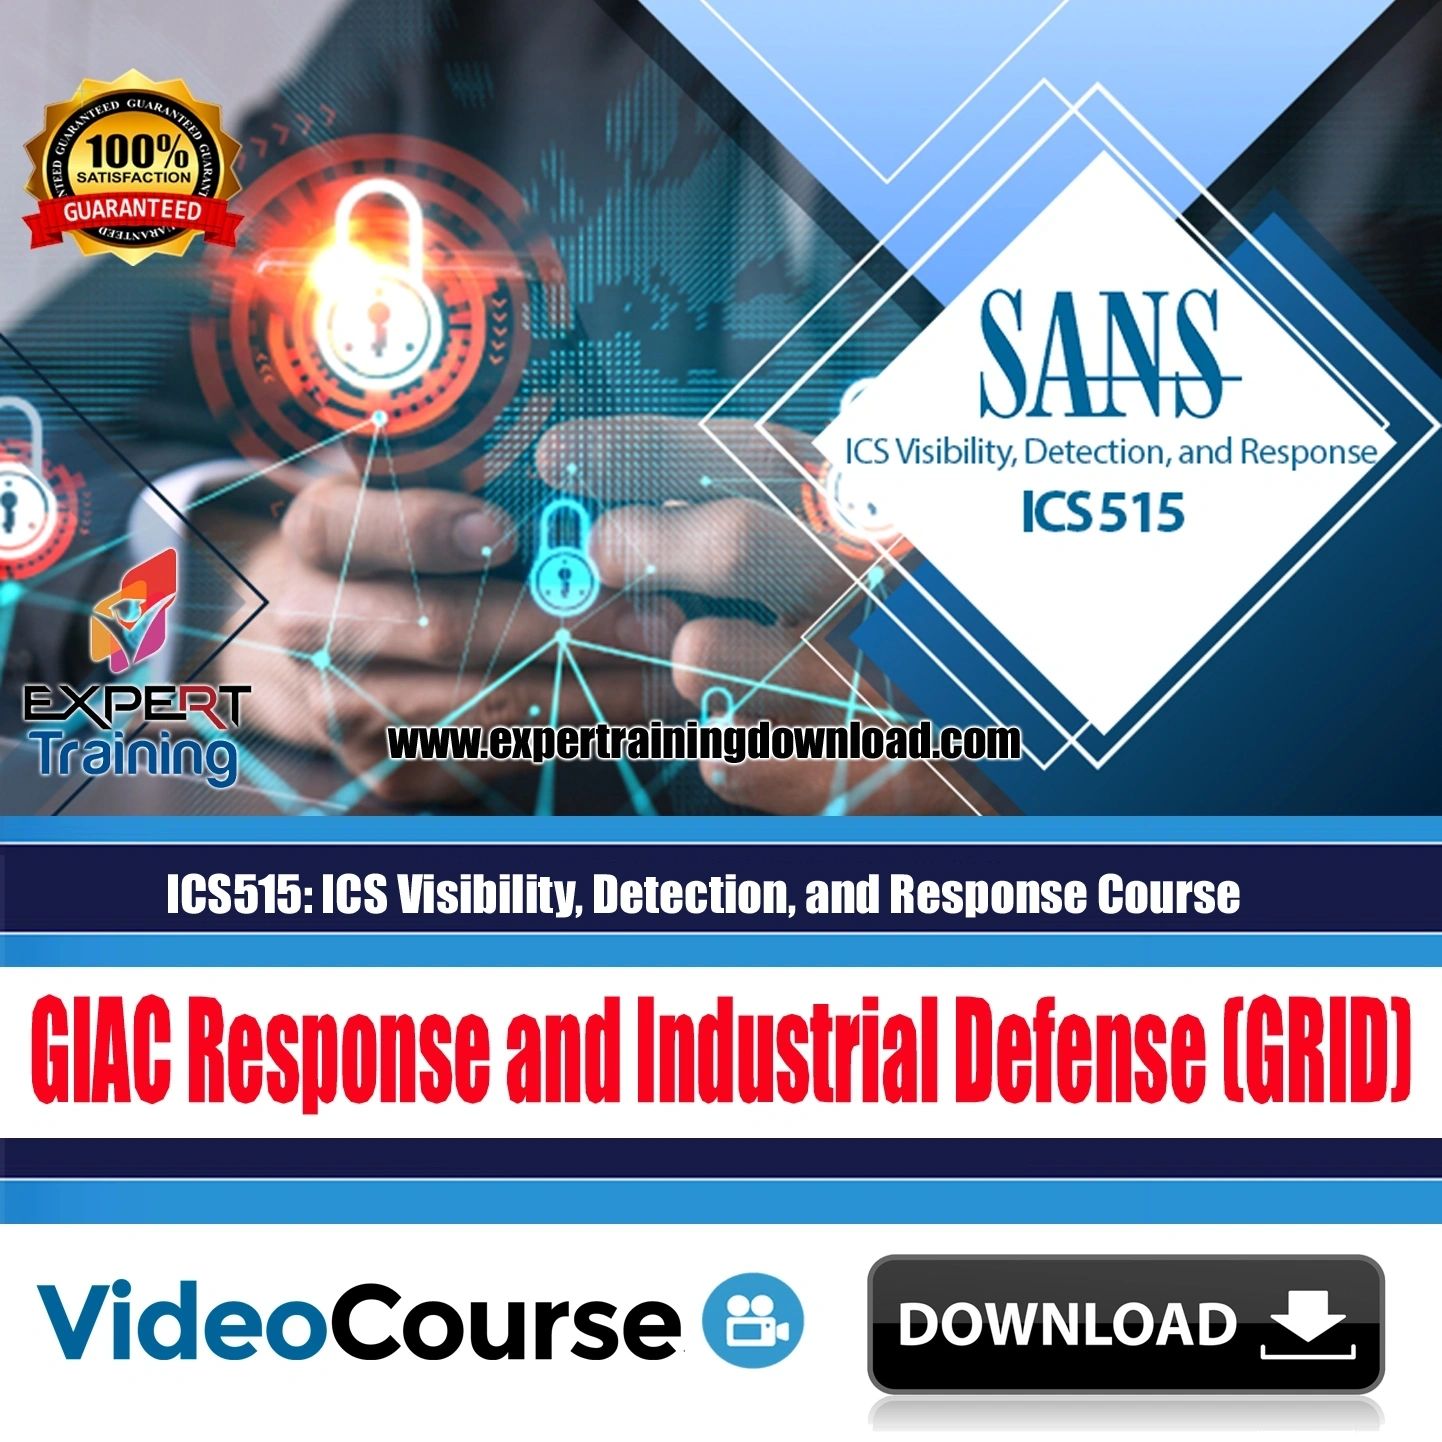 ICS515 ICS Visibility, Detection, and Response Course GIAC Response and Industrial Defense (GRID)